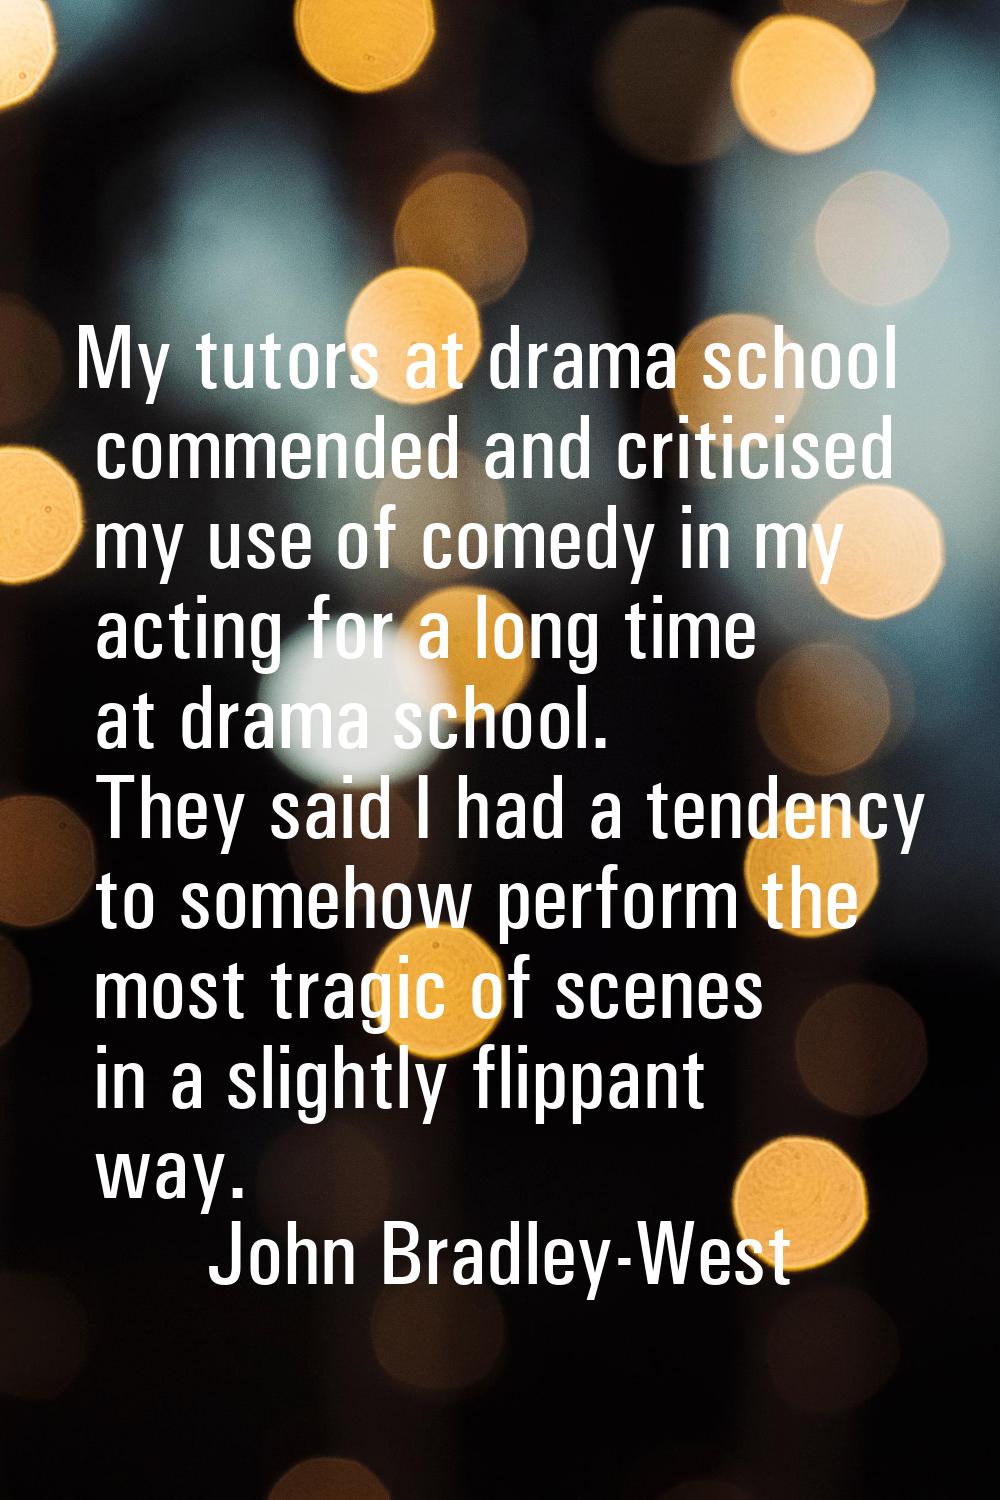 My tutors at drama school commended and criticised my use of comedy in my acting for a long time at